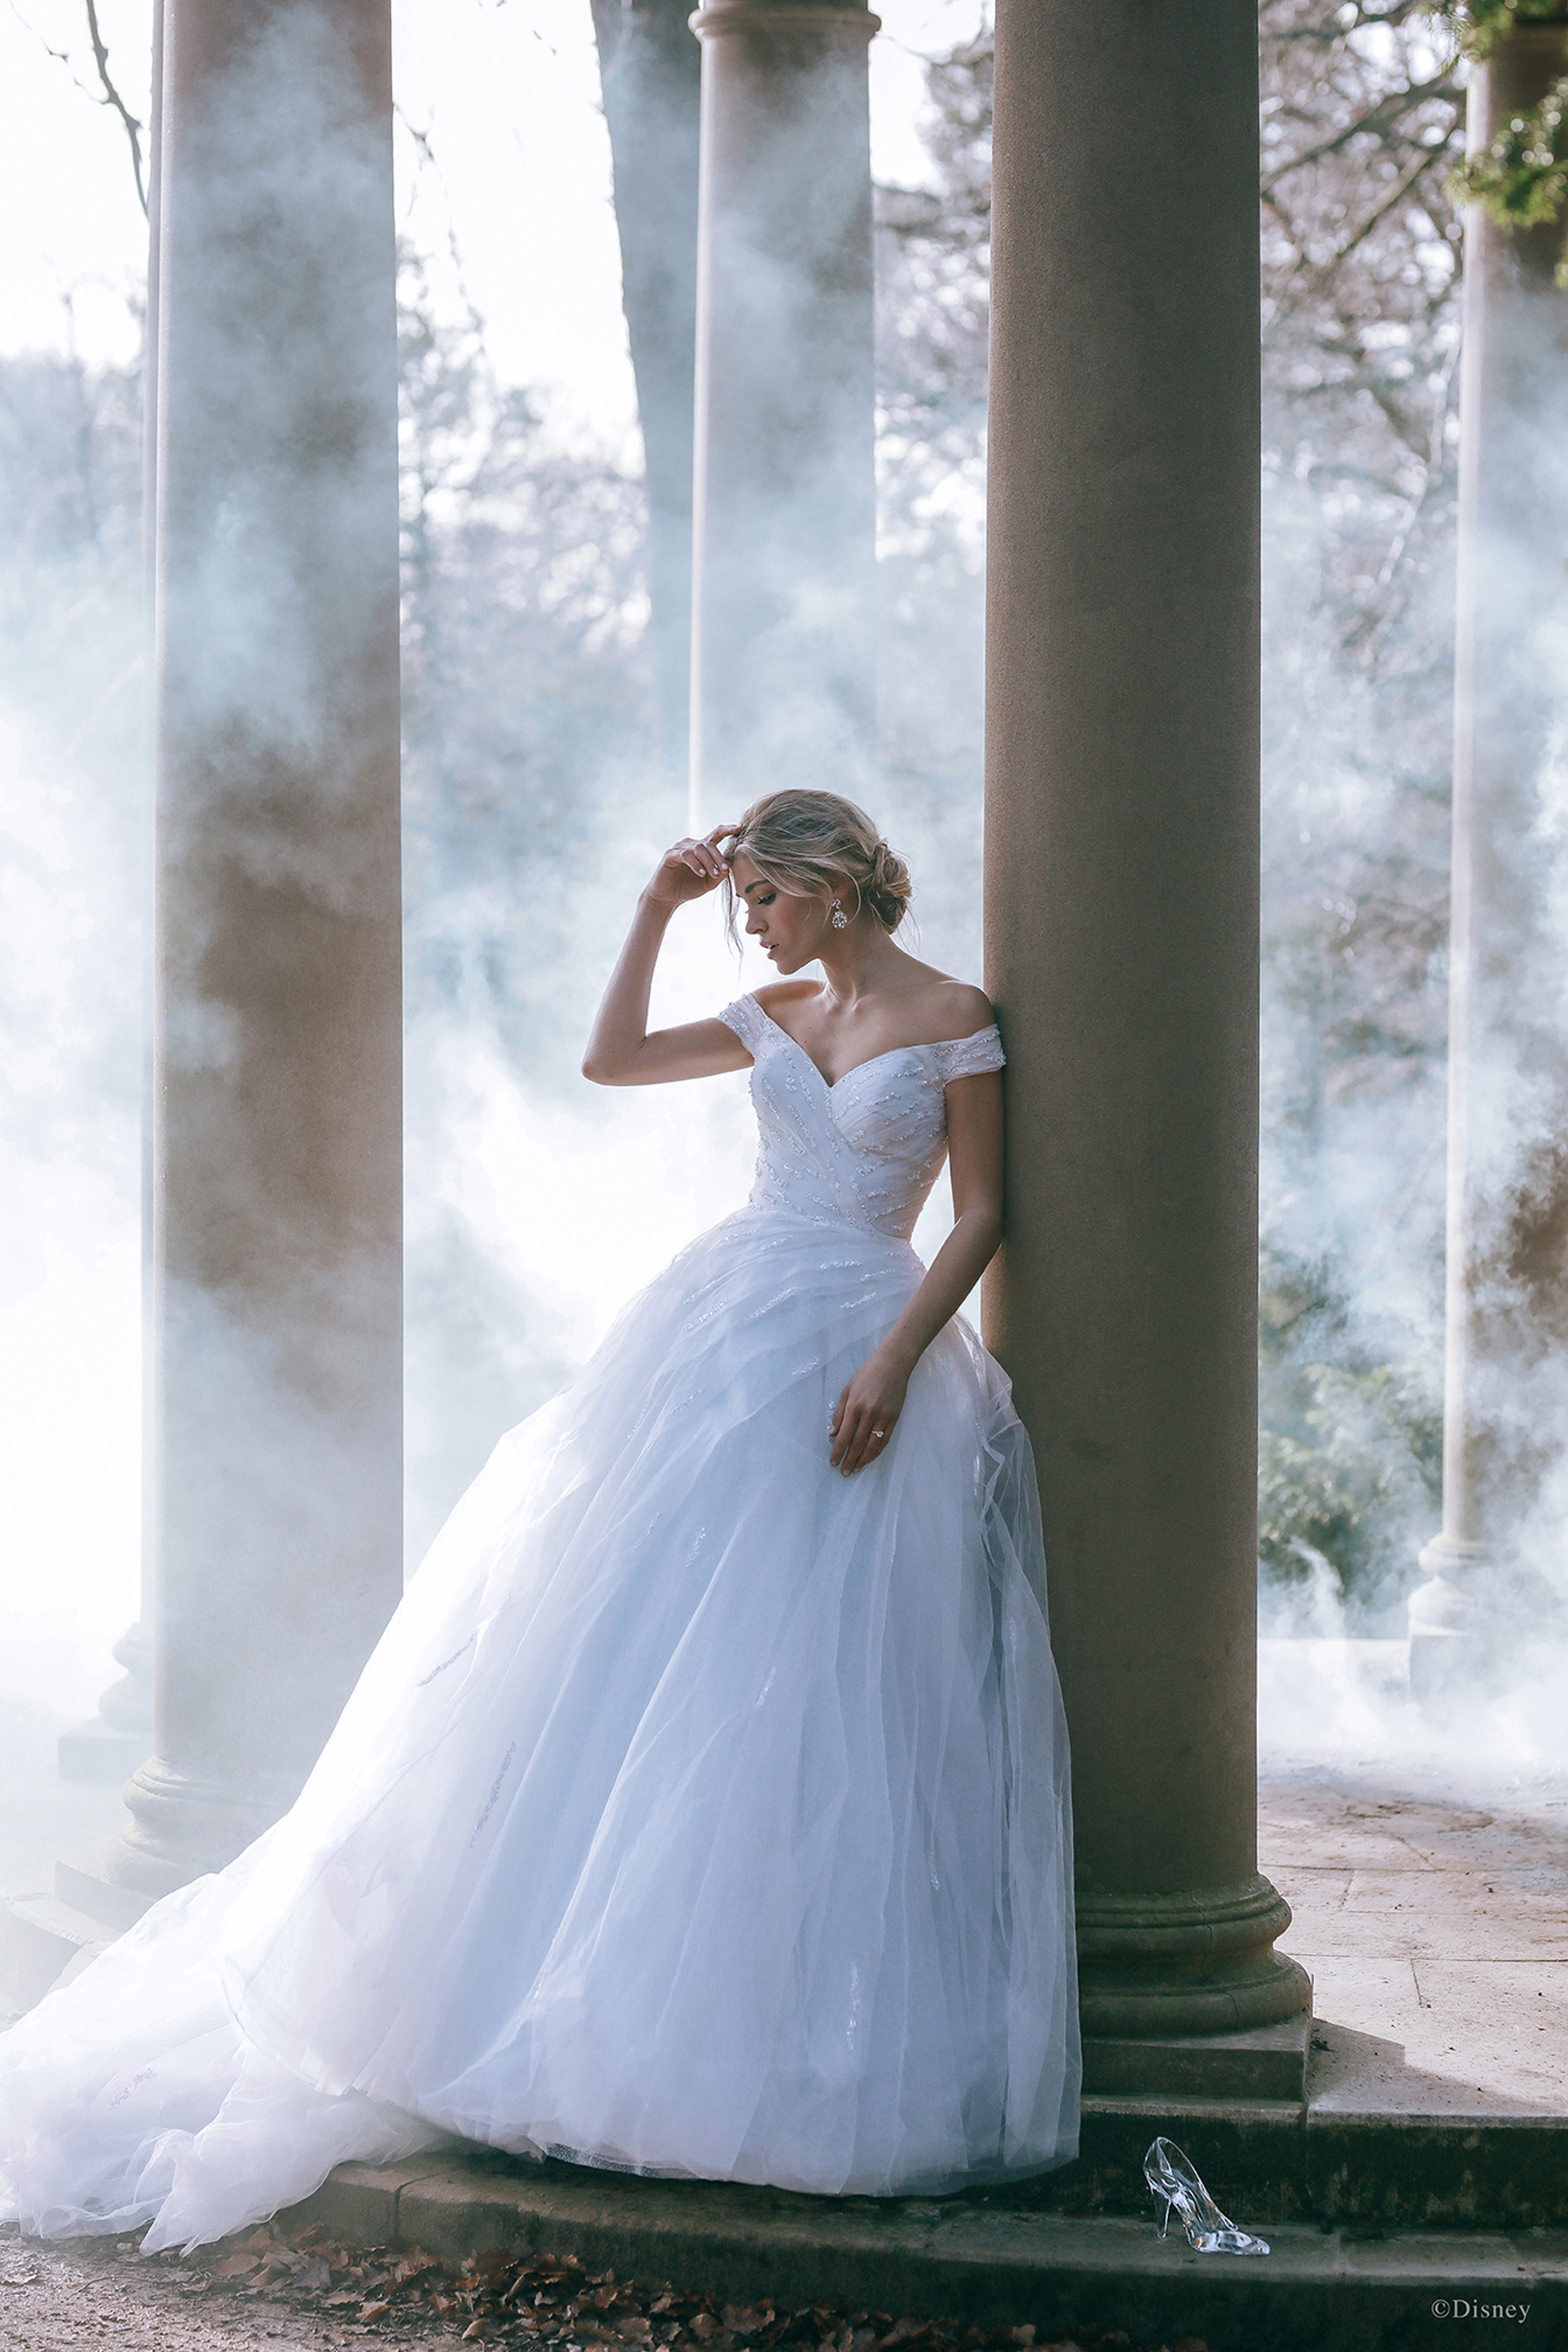 Modern Fairy Tale Princess Wedding Dresses - Part 1 - Belle the Magazine .  The Wedding Blog For The Sophisticated Bride